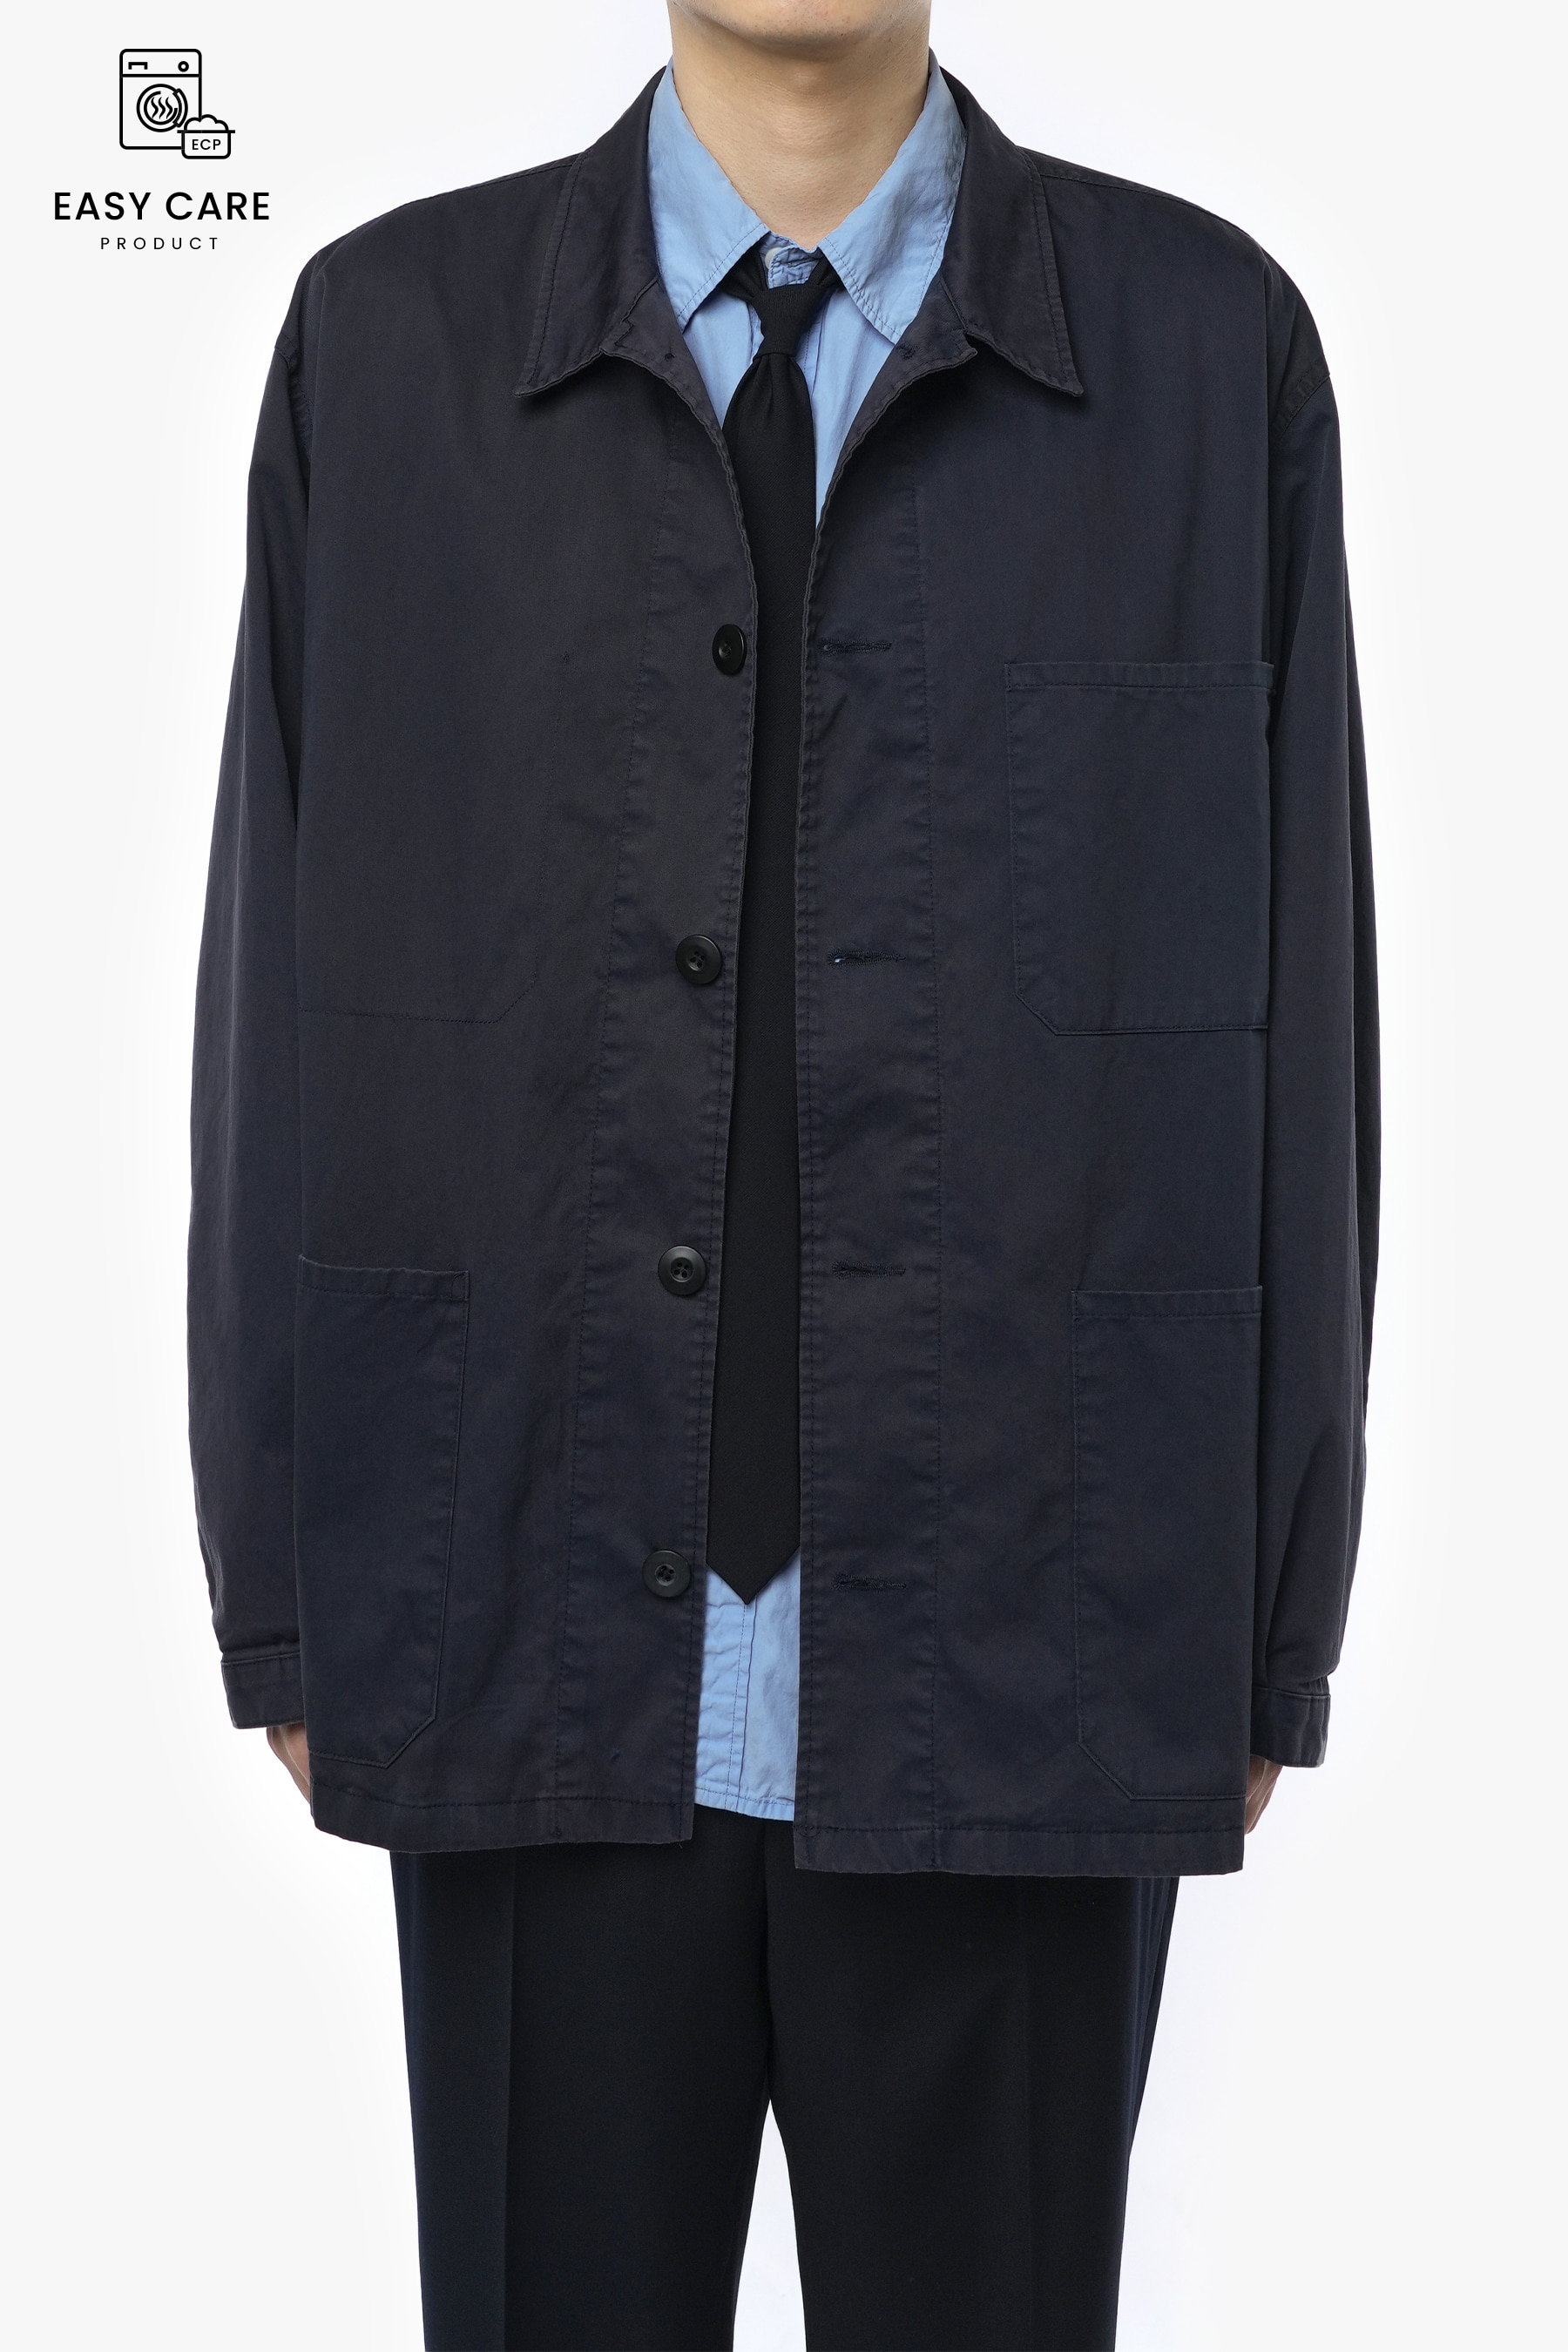 DUSTY NAVY WASHED FRENCH WORK JACKET V.2 (ECP GARMENT PROCESS)